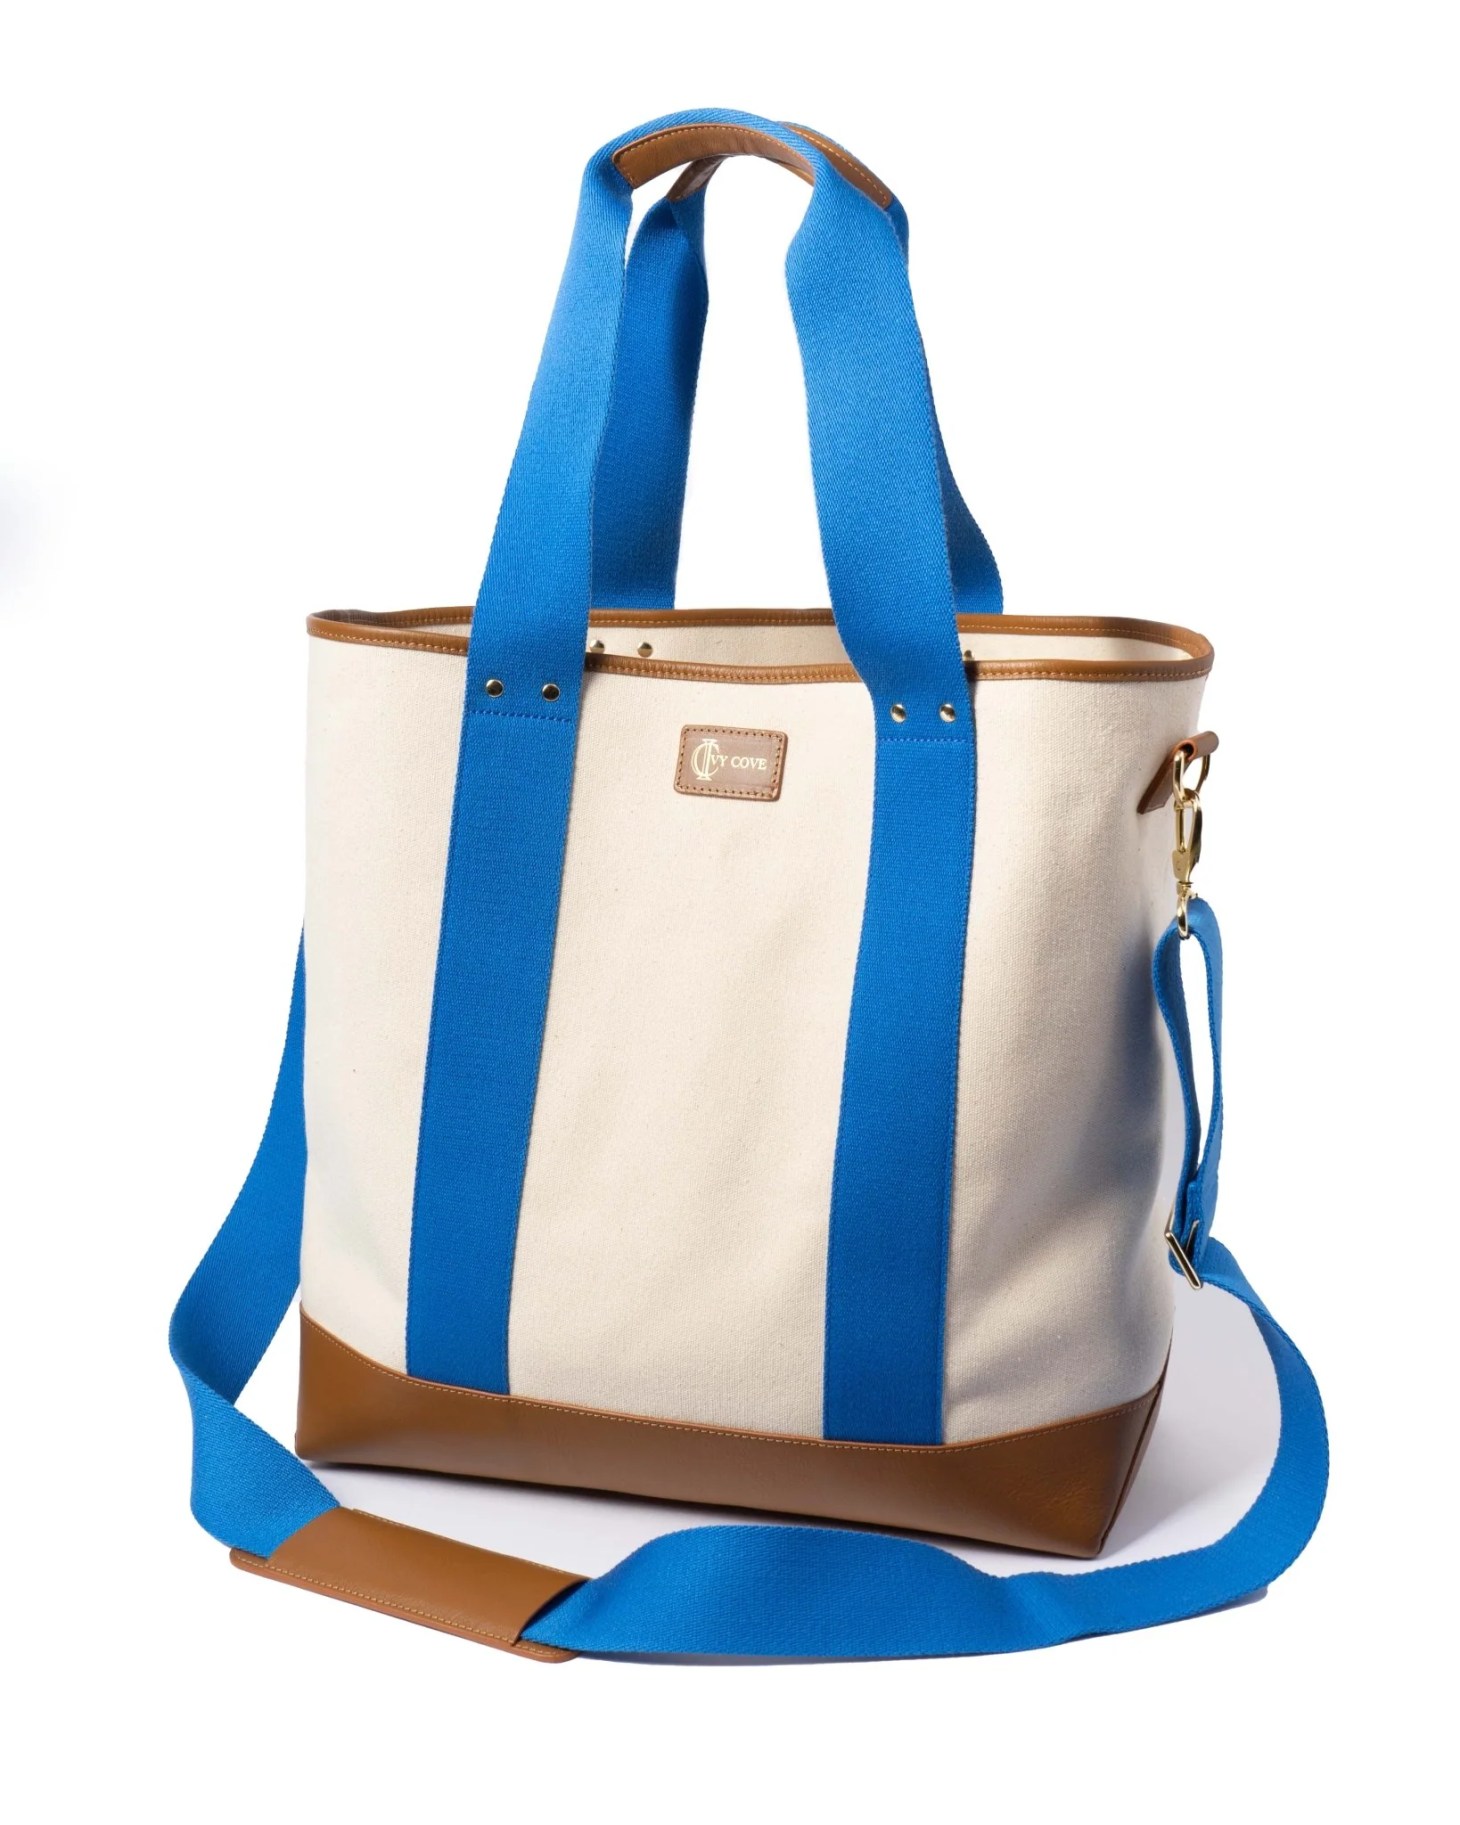 ivy cove saltwater tote, from our mother's day gift guide